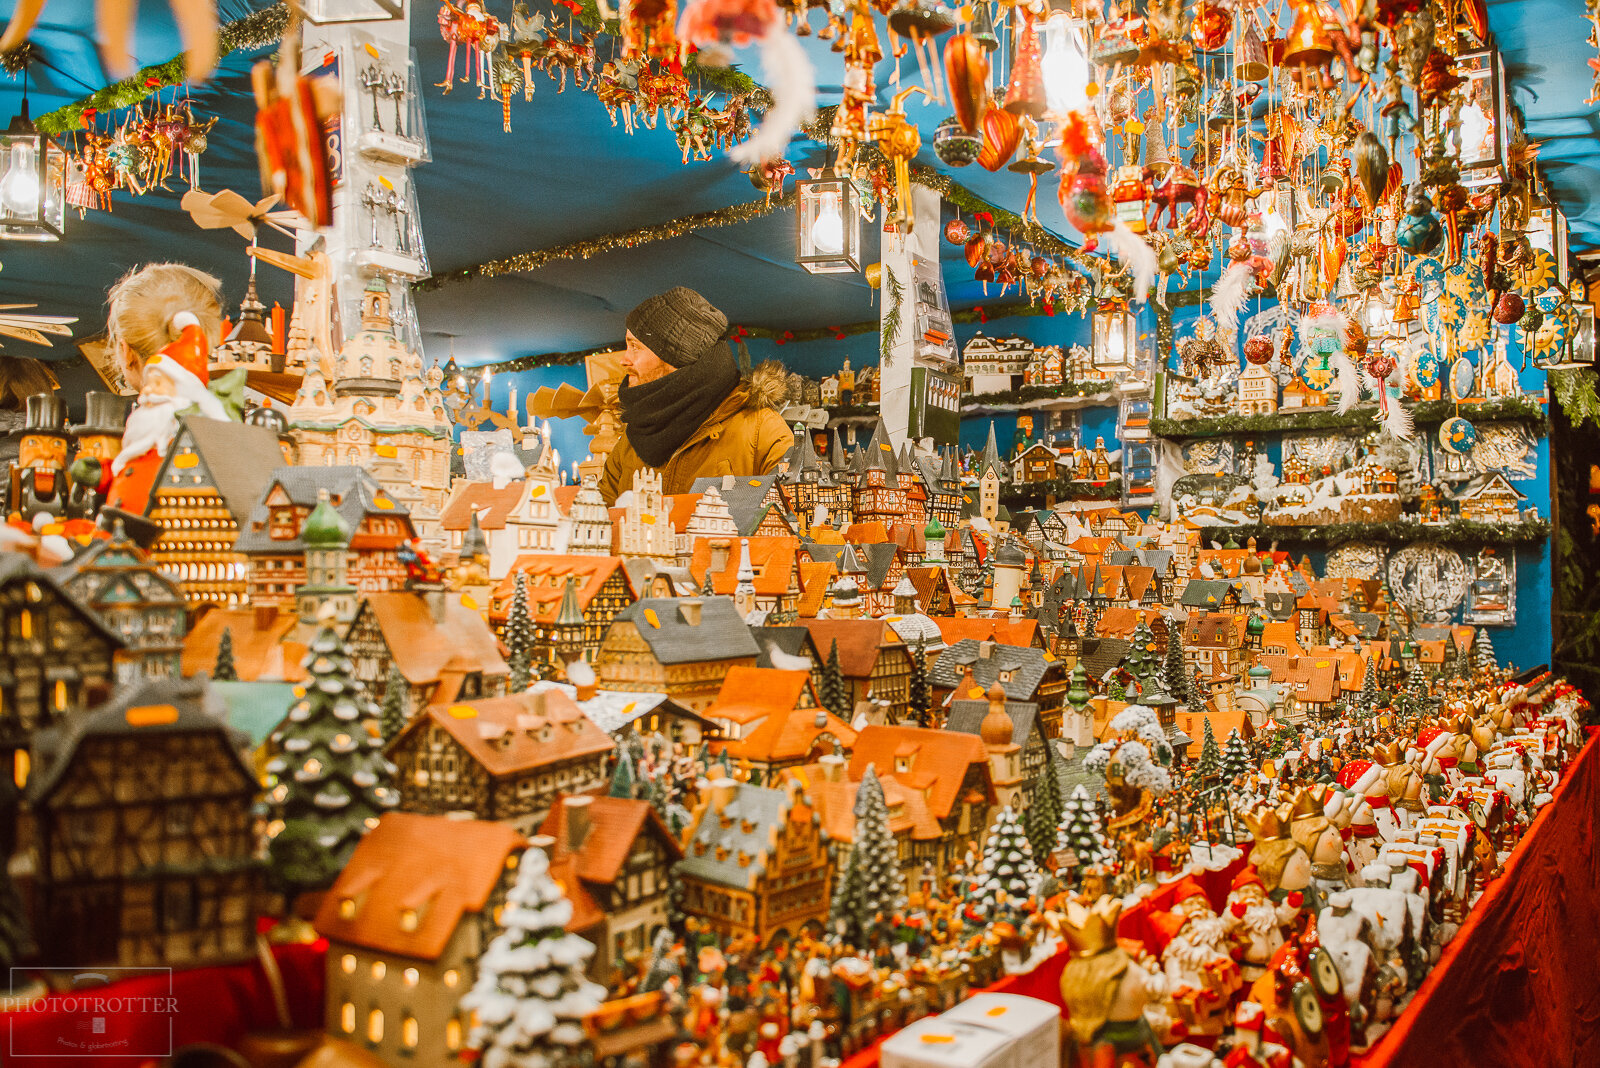   Read all about it on the blog:    Christmas in Germany: Nürnberg Christkindlesmarkt  